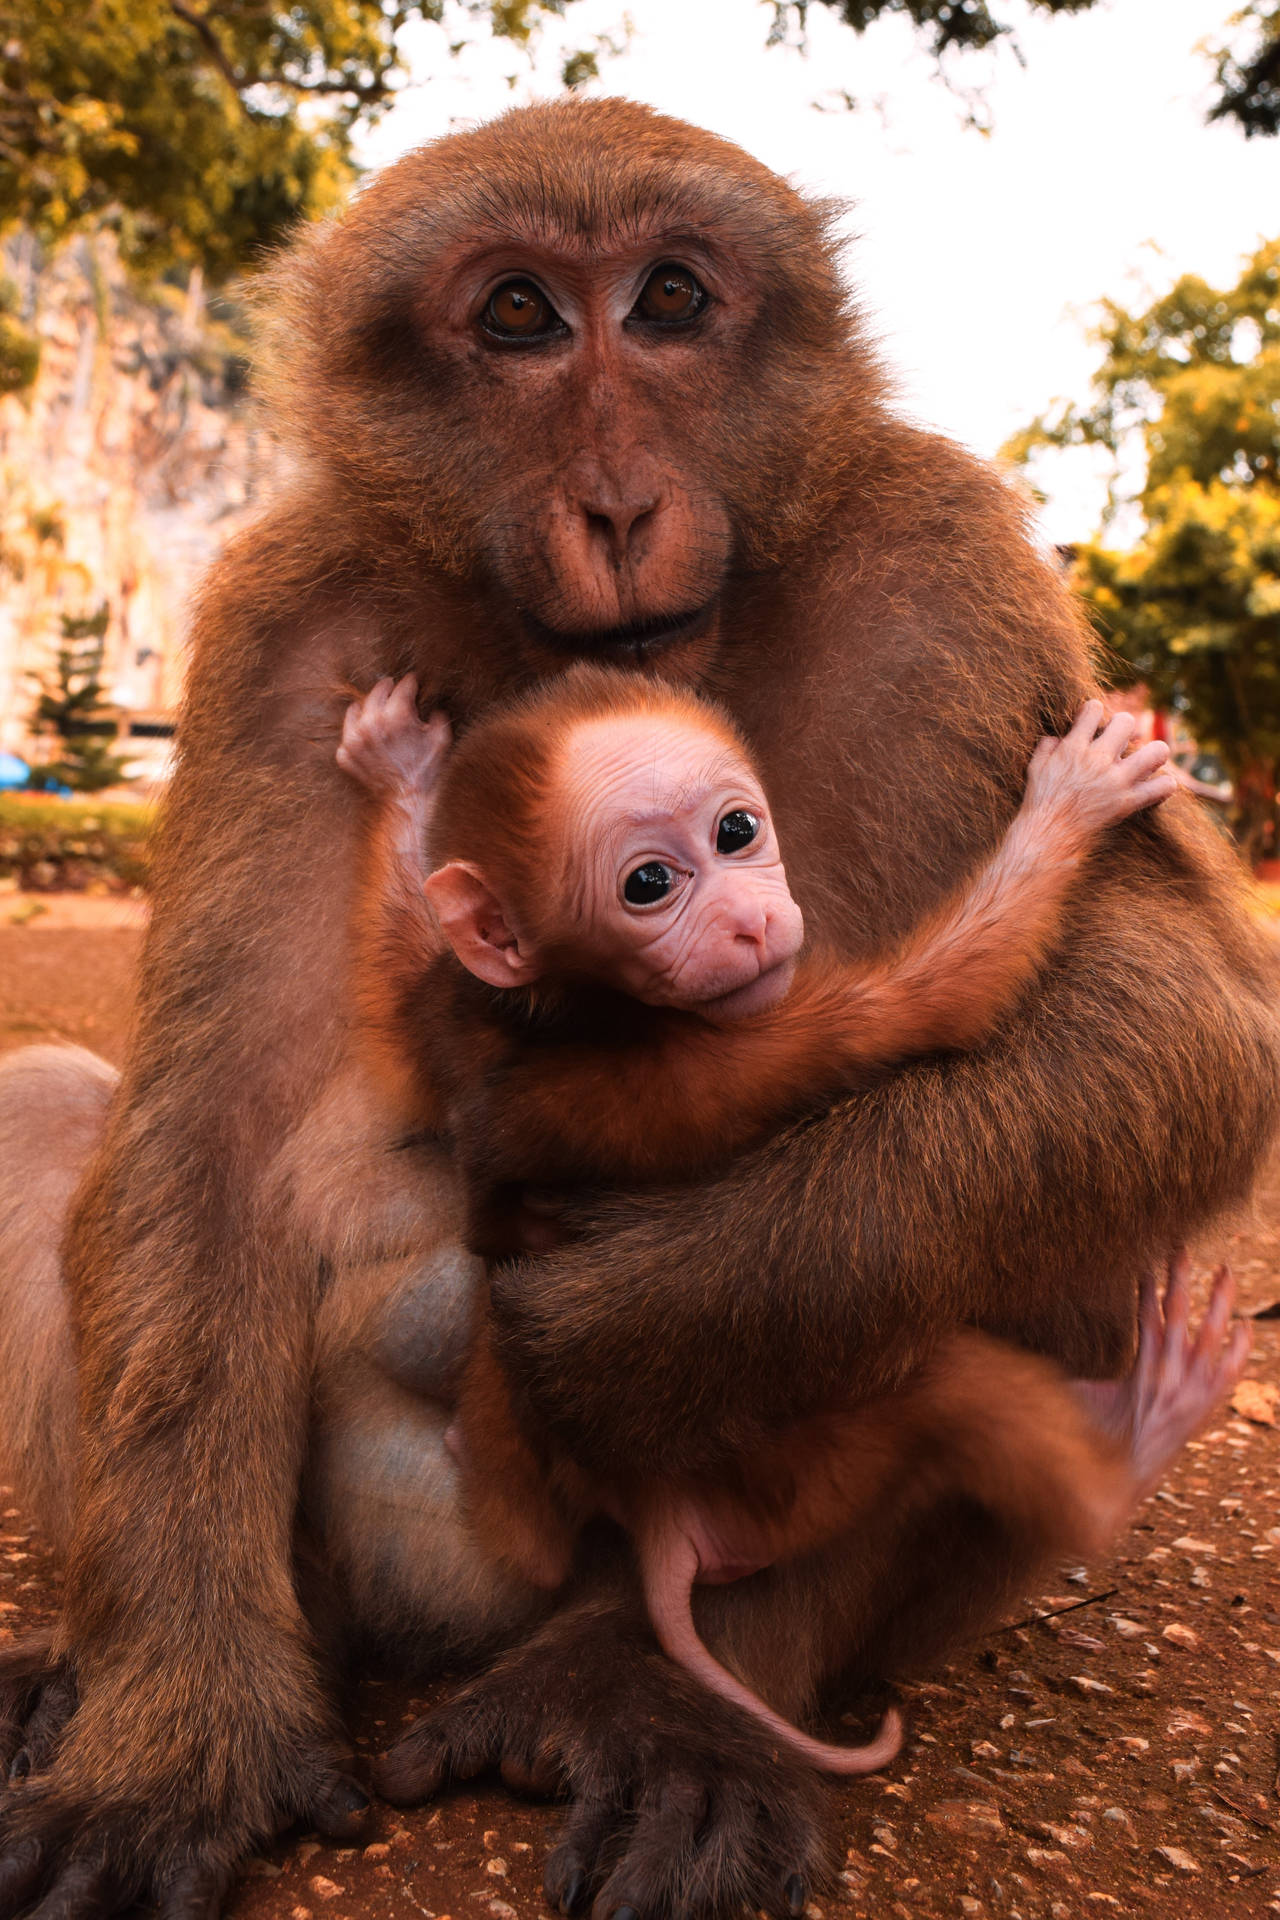 Cute Animals Monkey Carrying Her Infant Wallpaper